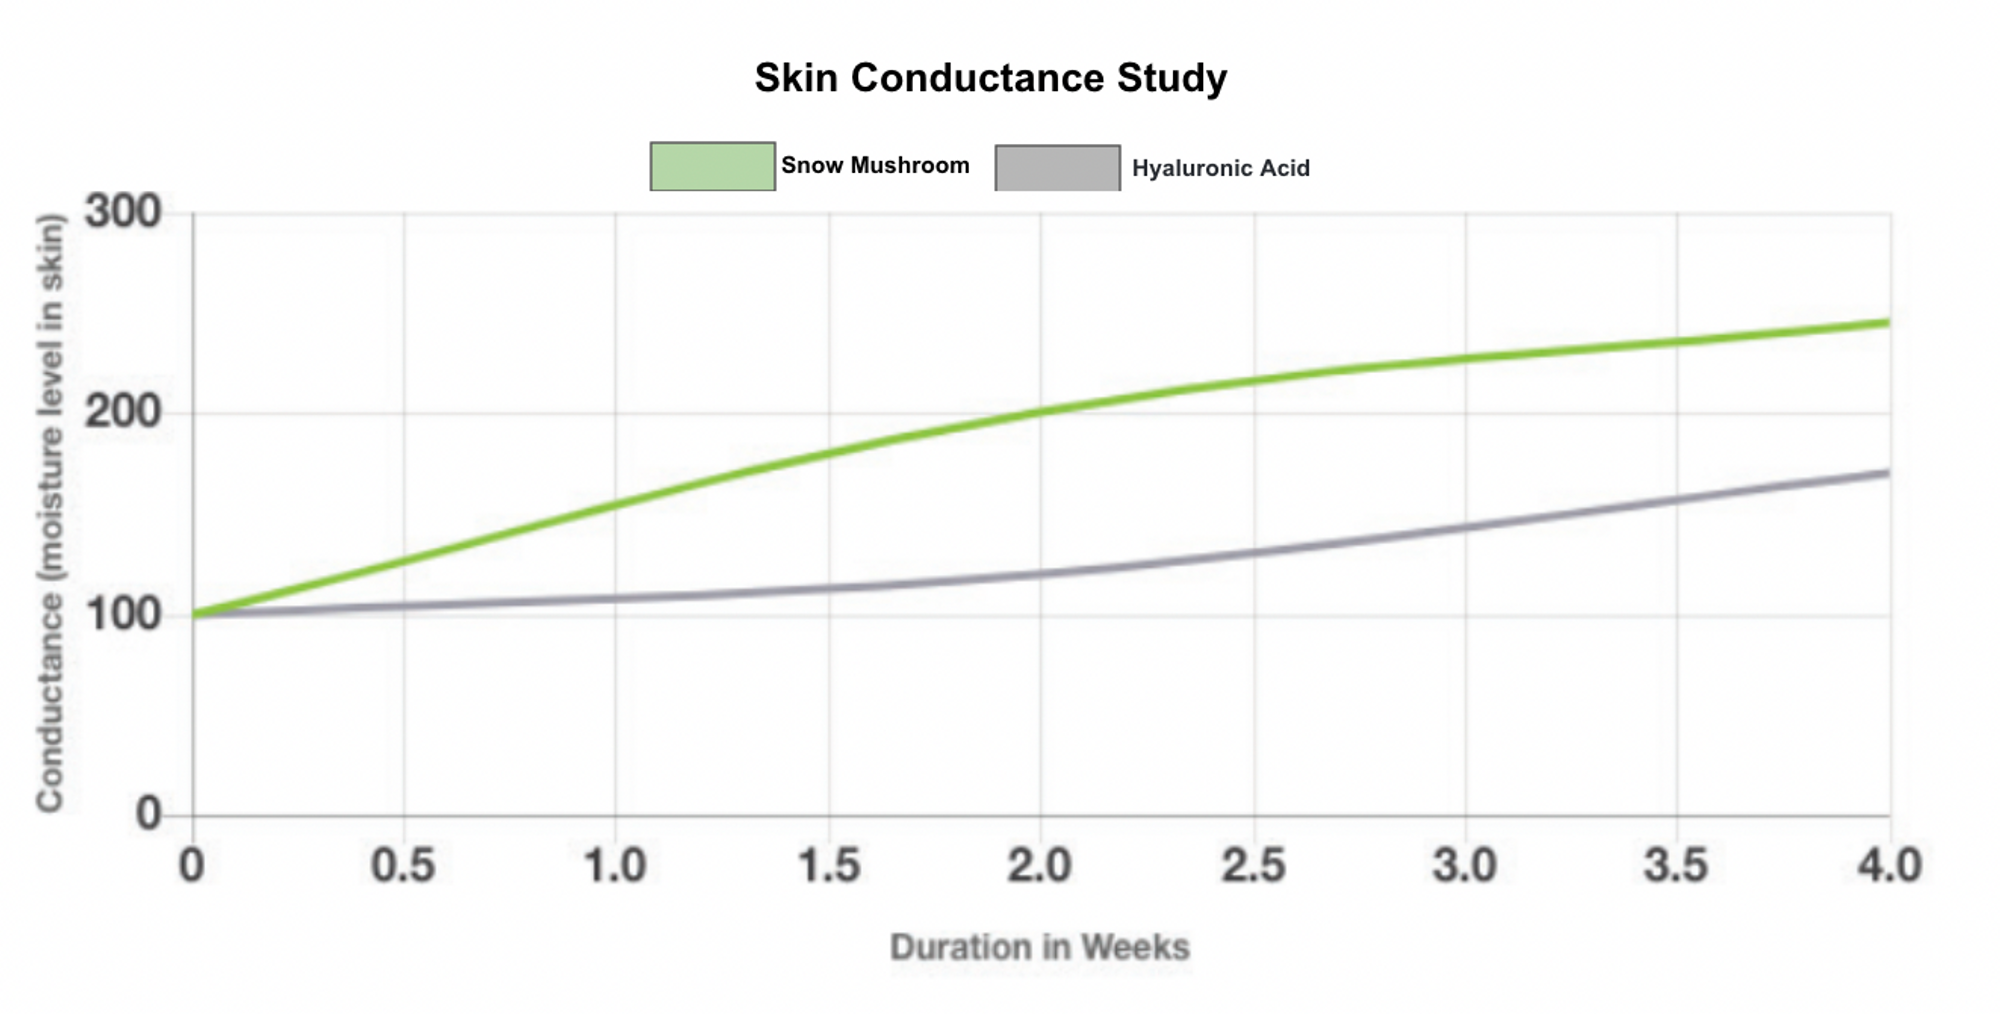 Line graph from clinical studies comparing conductance (moisture in skin) of snow mushroom vs hyaluronic acid. The data shows that snow mushroom is more effective at increasing the skin’s  ability to absorb and retain water over time.